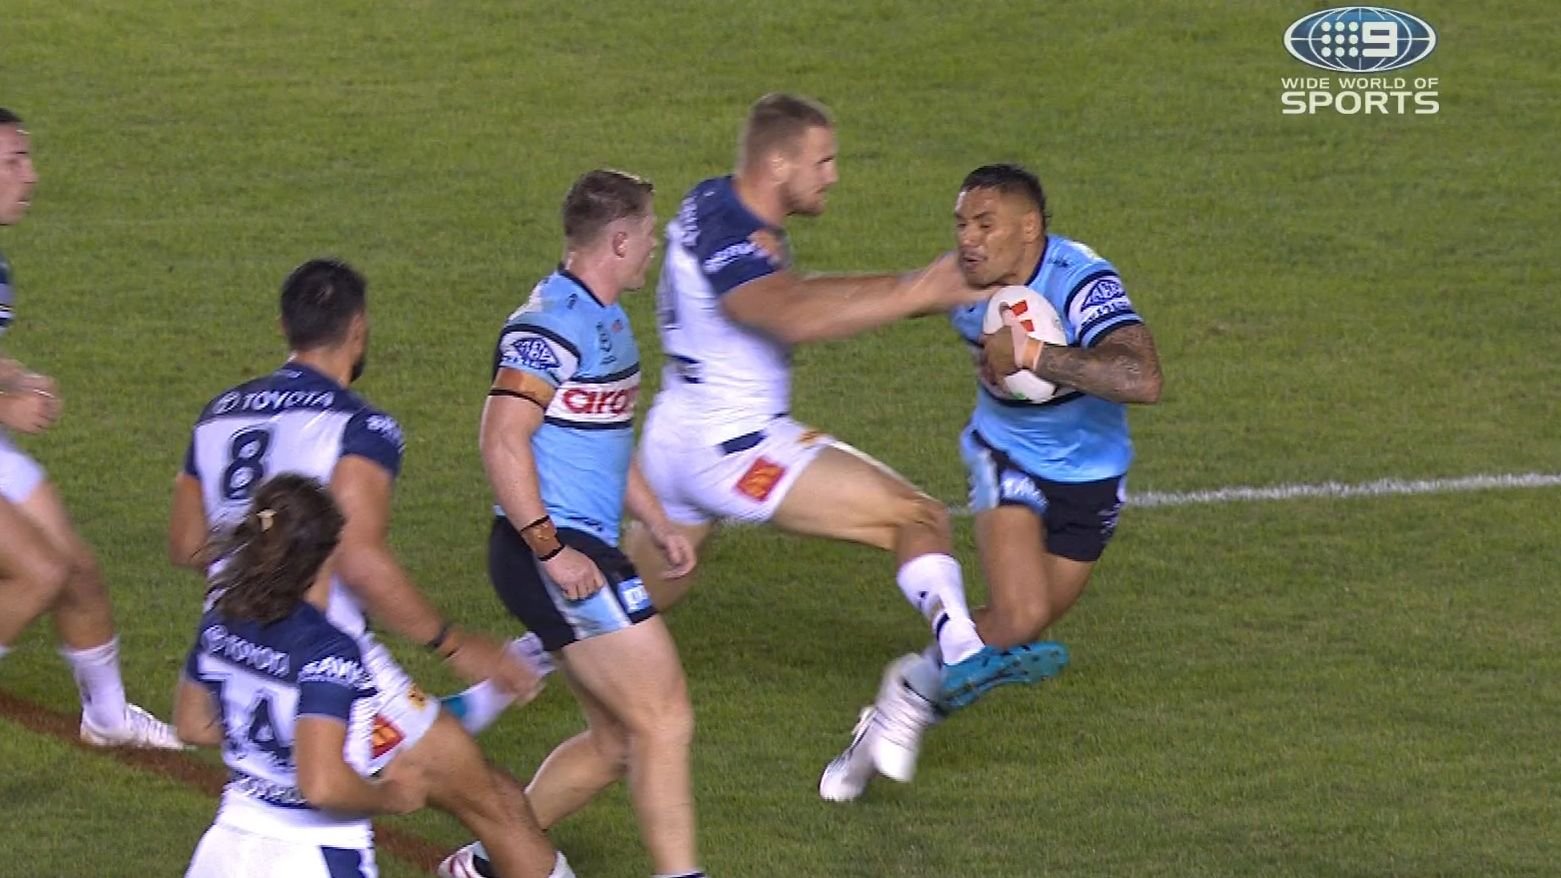 'Miserable' Cowboys sink to new low as Sharks run riot in memory of Paul Green